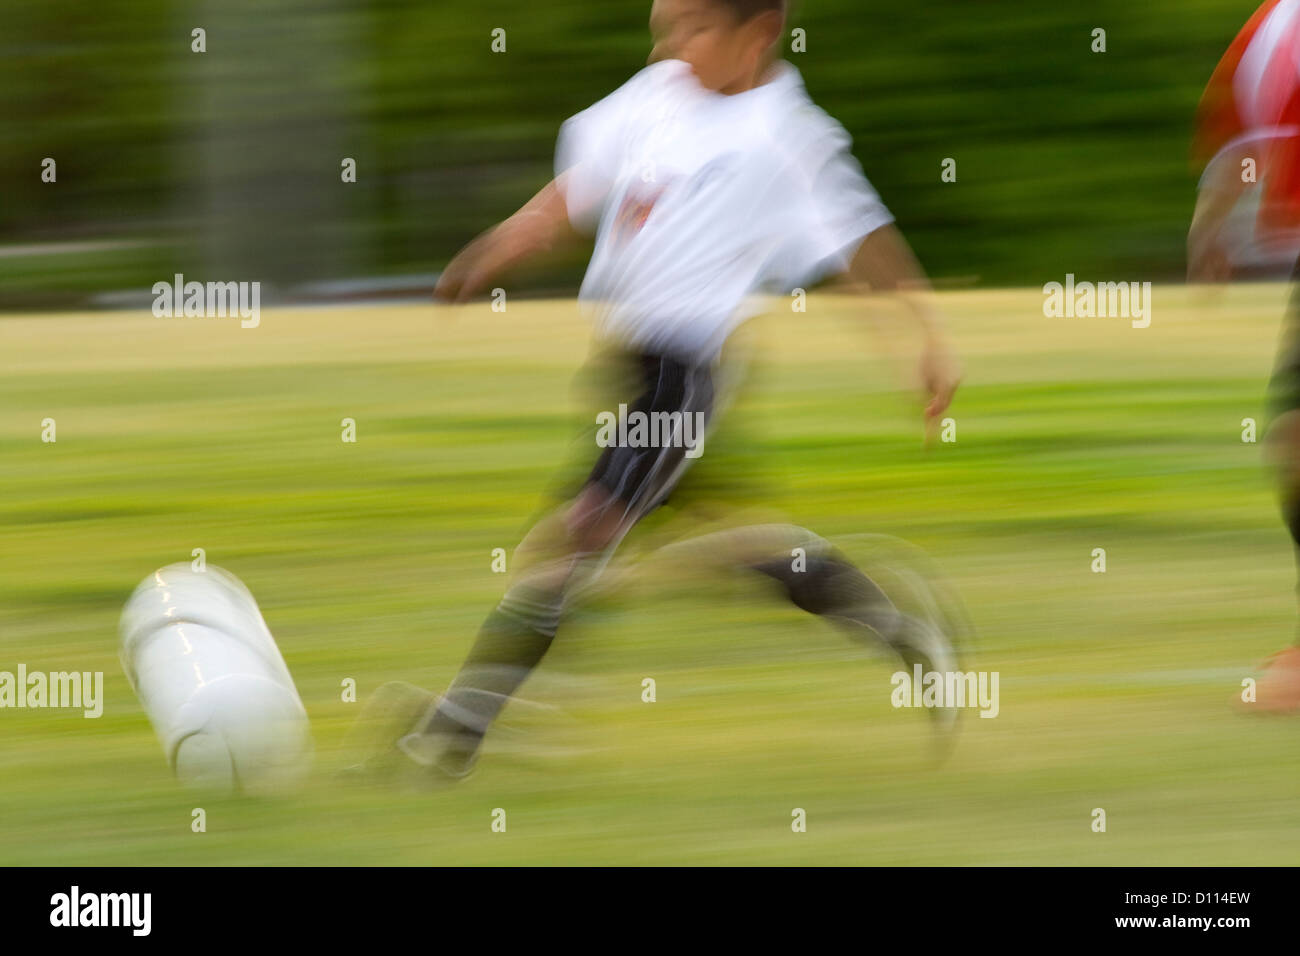 Blurred soccer player running with ball demonstrating the speed of the game. St Paul Minnesota MN USA Stock Photo